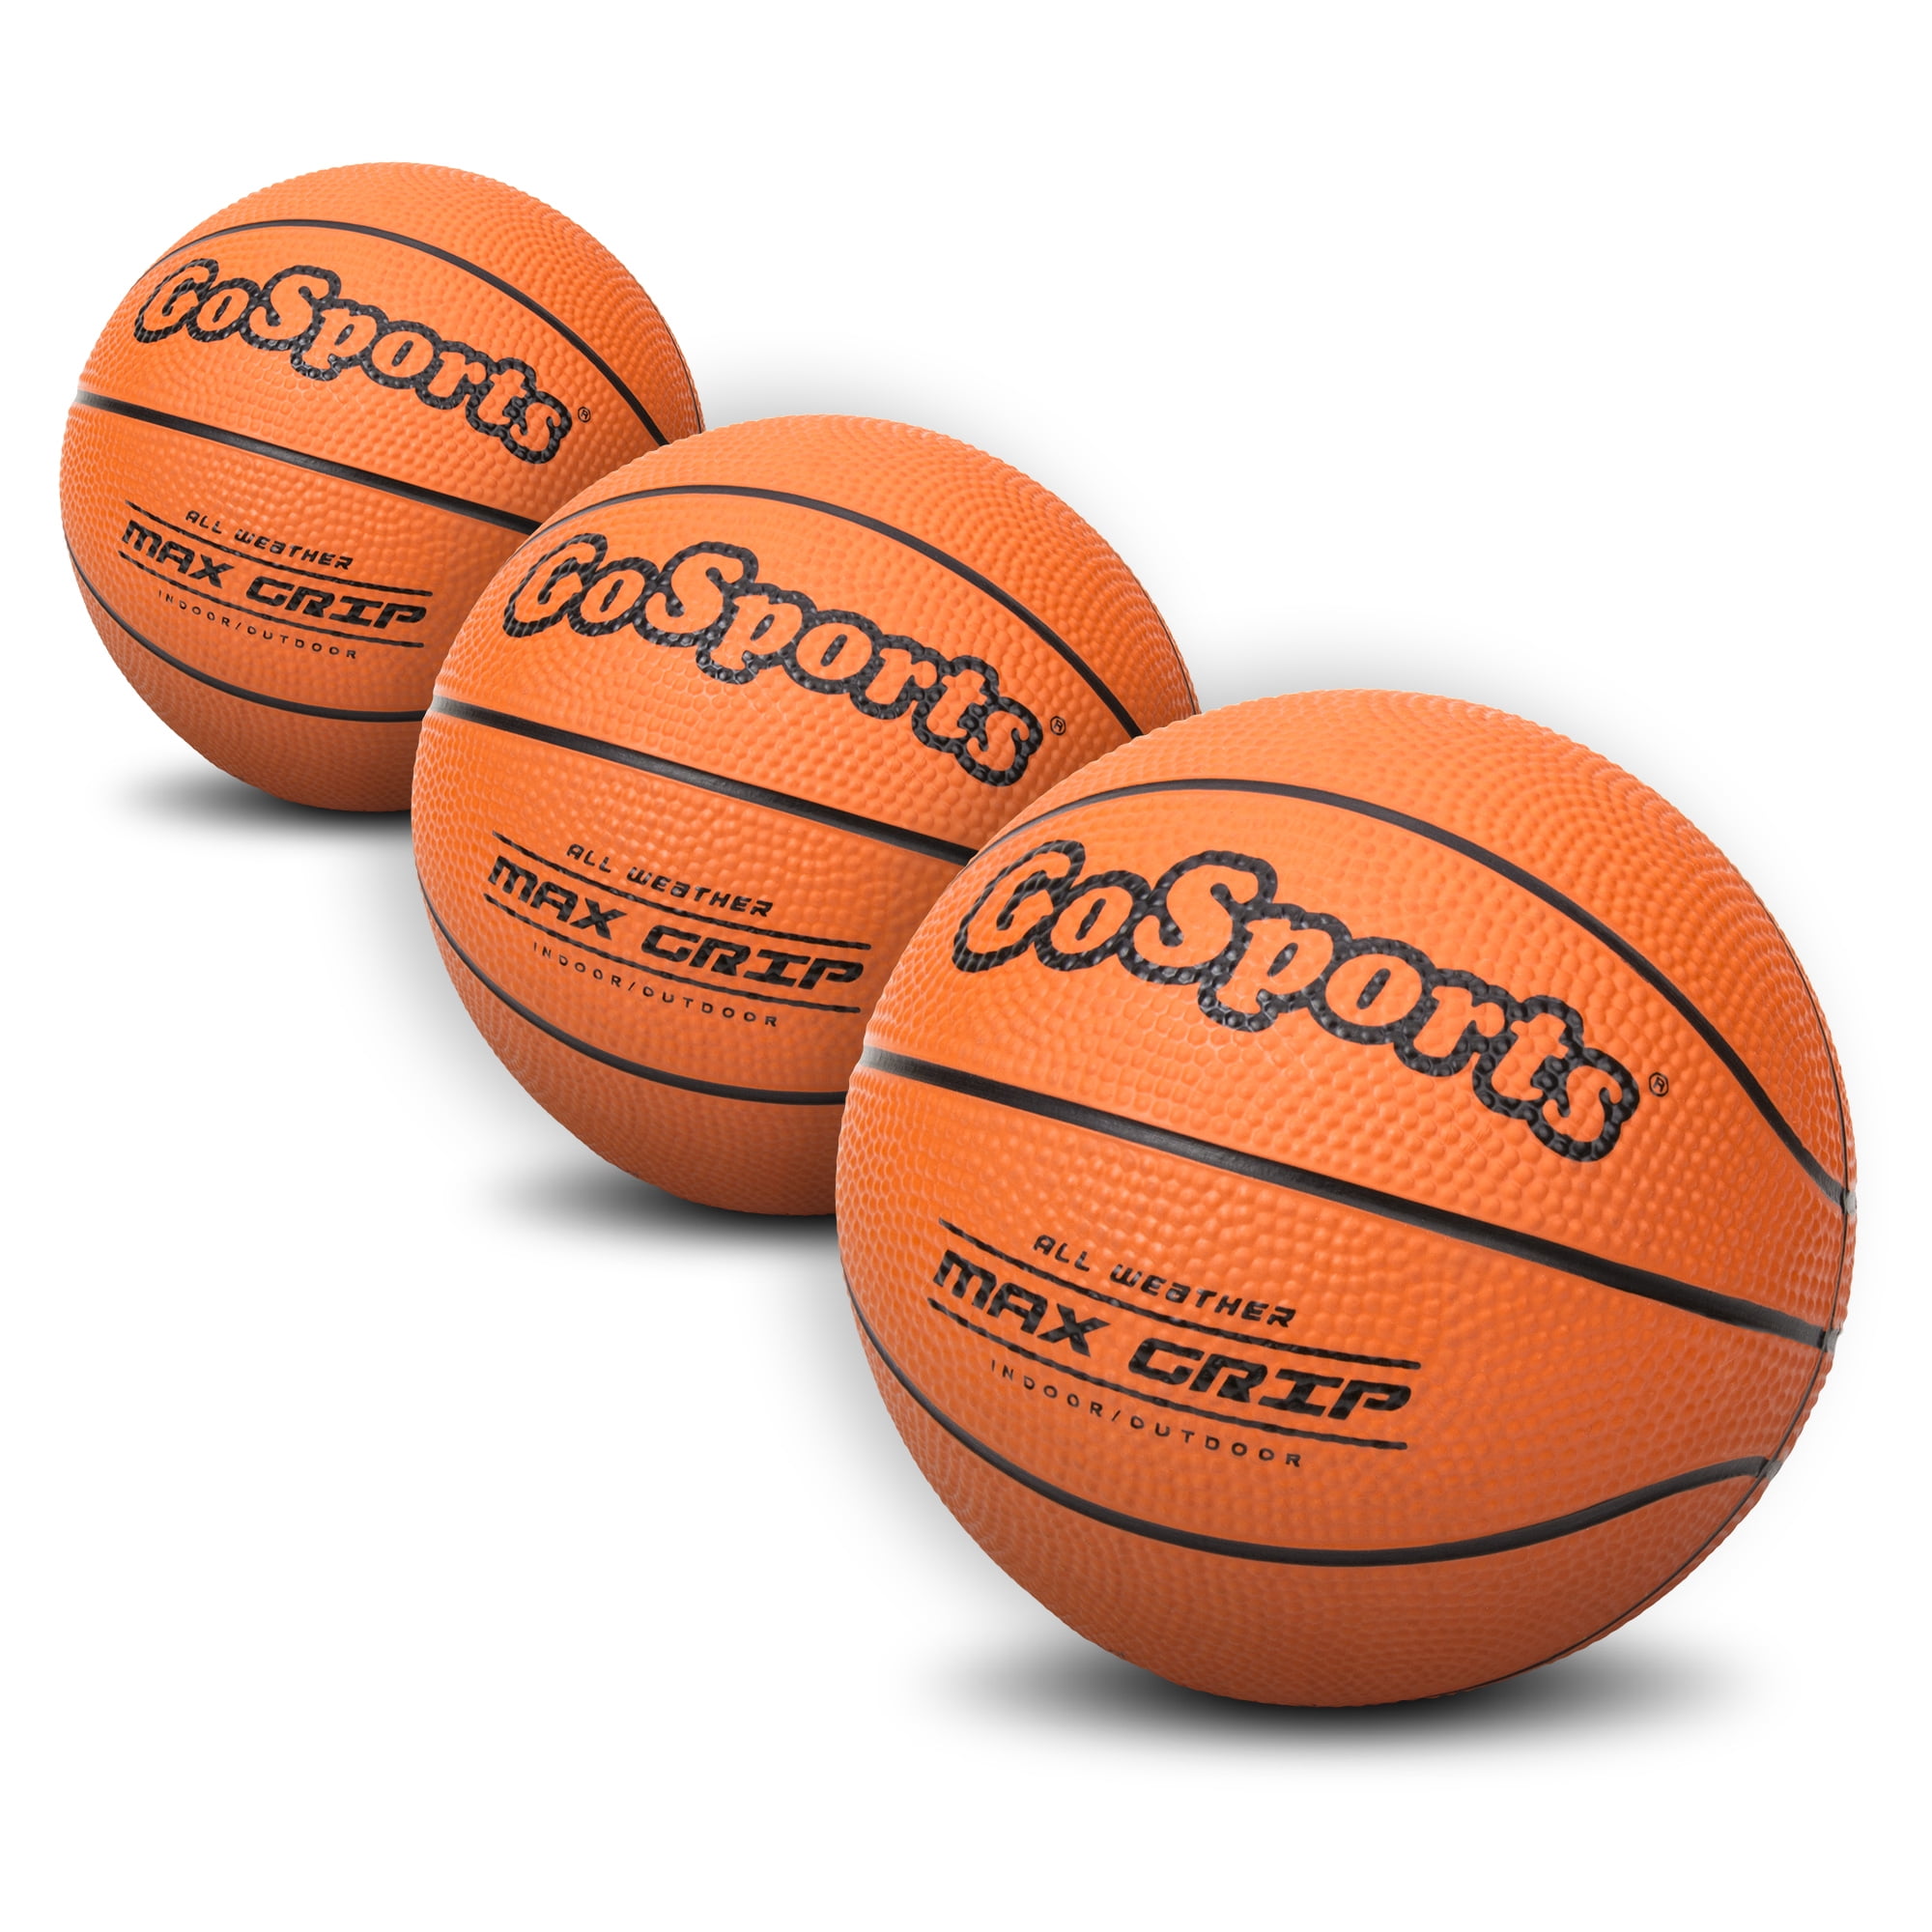 GoSports Pool Basketball Hoops Inflatable Basketballs3 Pack Replacement Set 